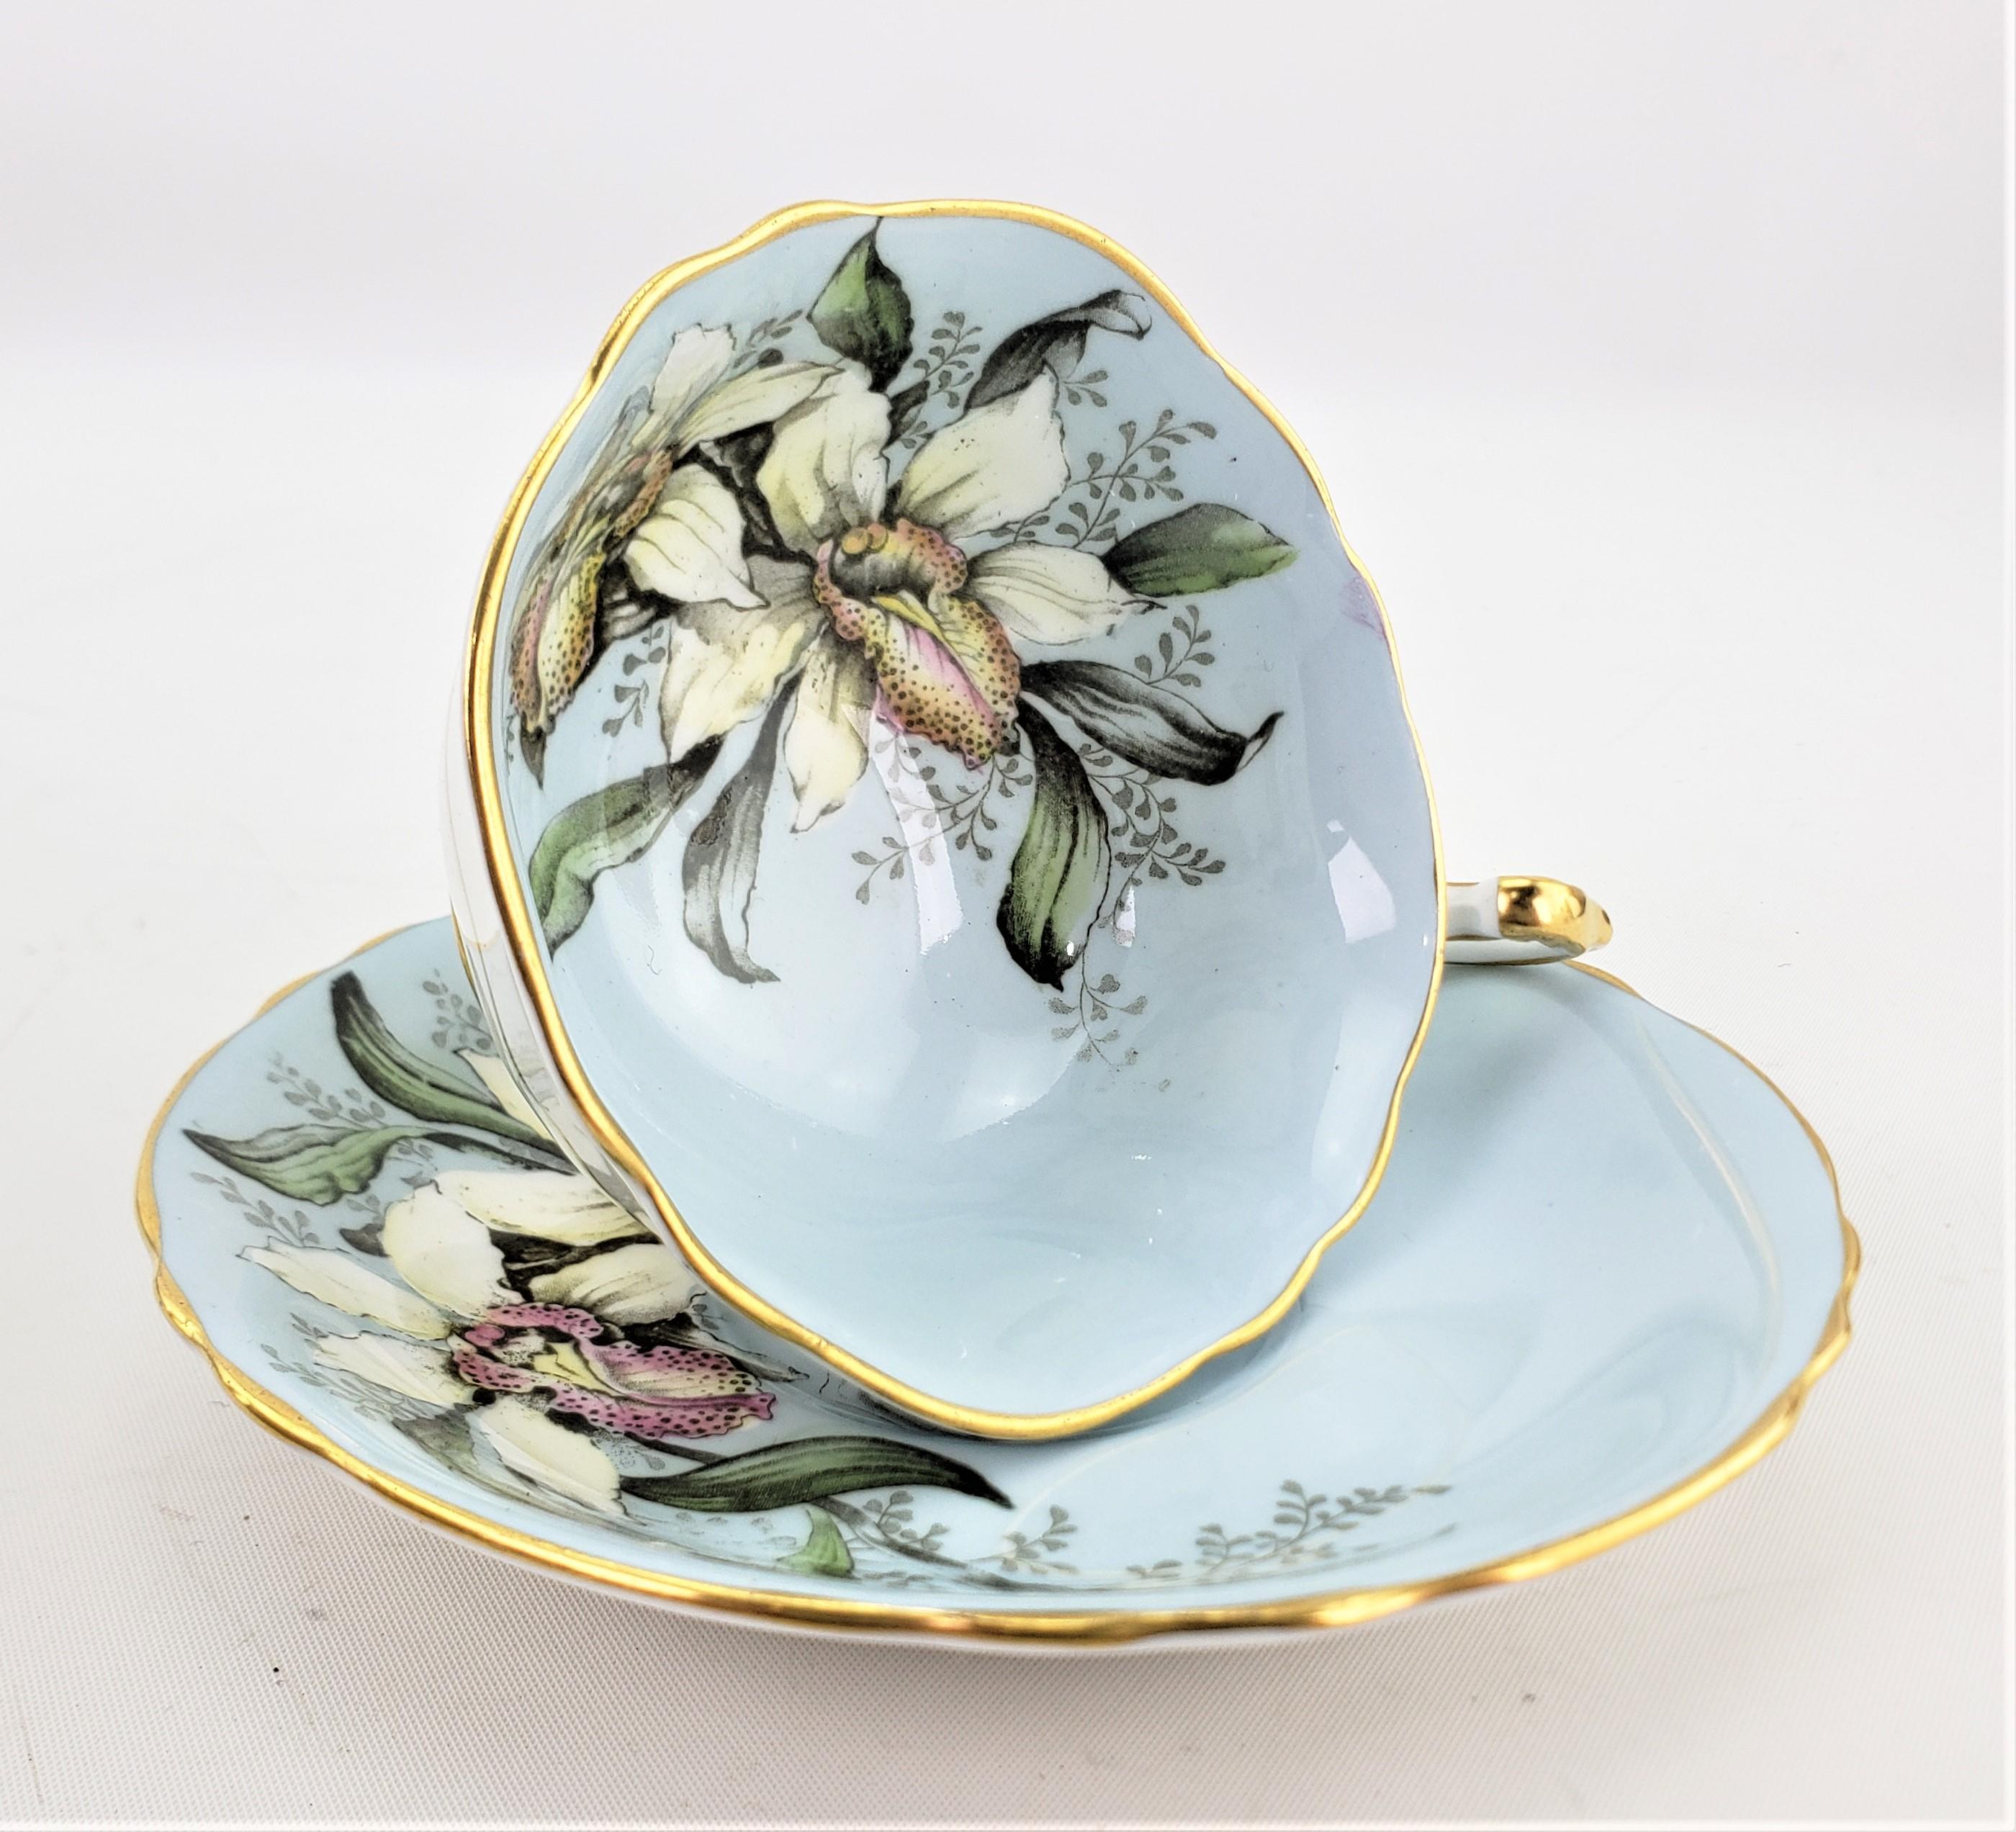 This teacup and saucer set was made by the renowned Paragon fine bone china factory of England in approximately 1960. The set is done with a robin egg blue ground with a large flowered pattern on the inside of the cup which is replicated on the